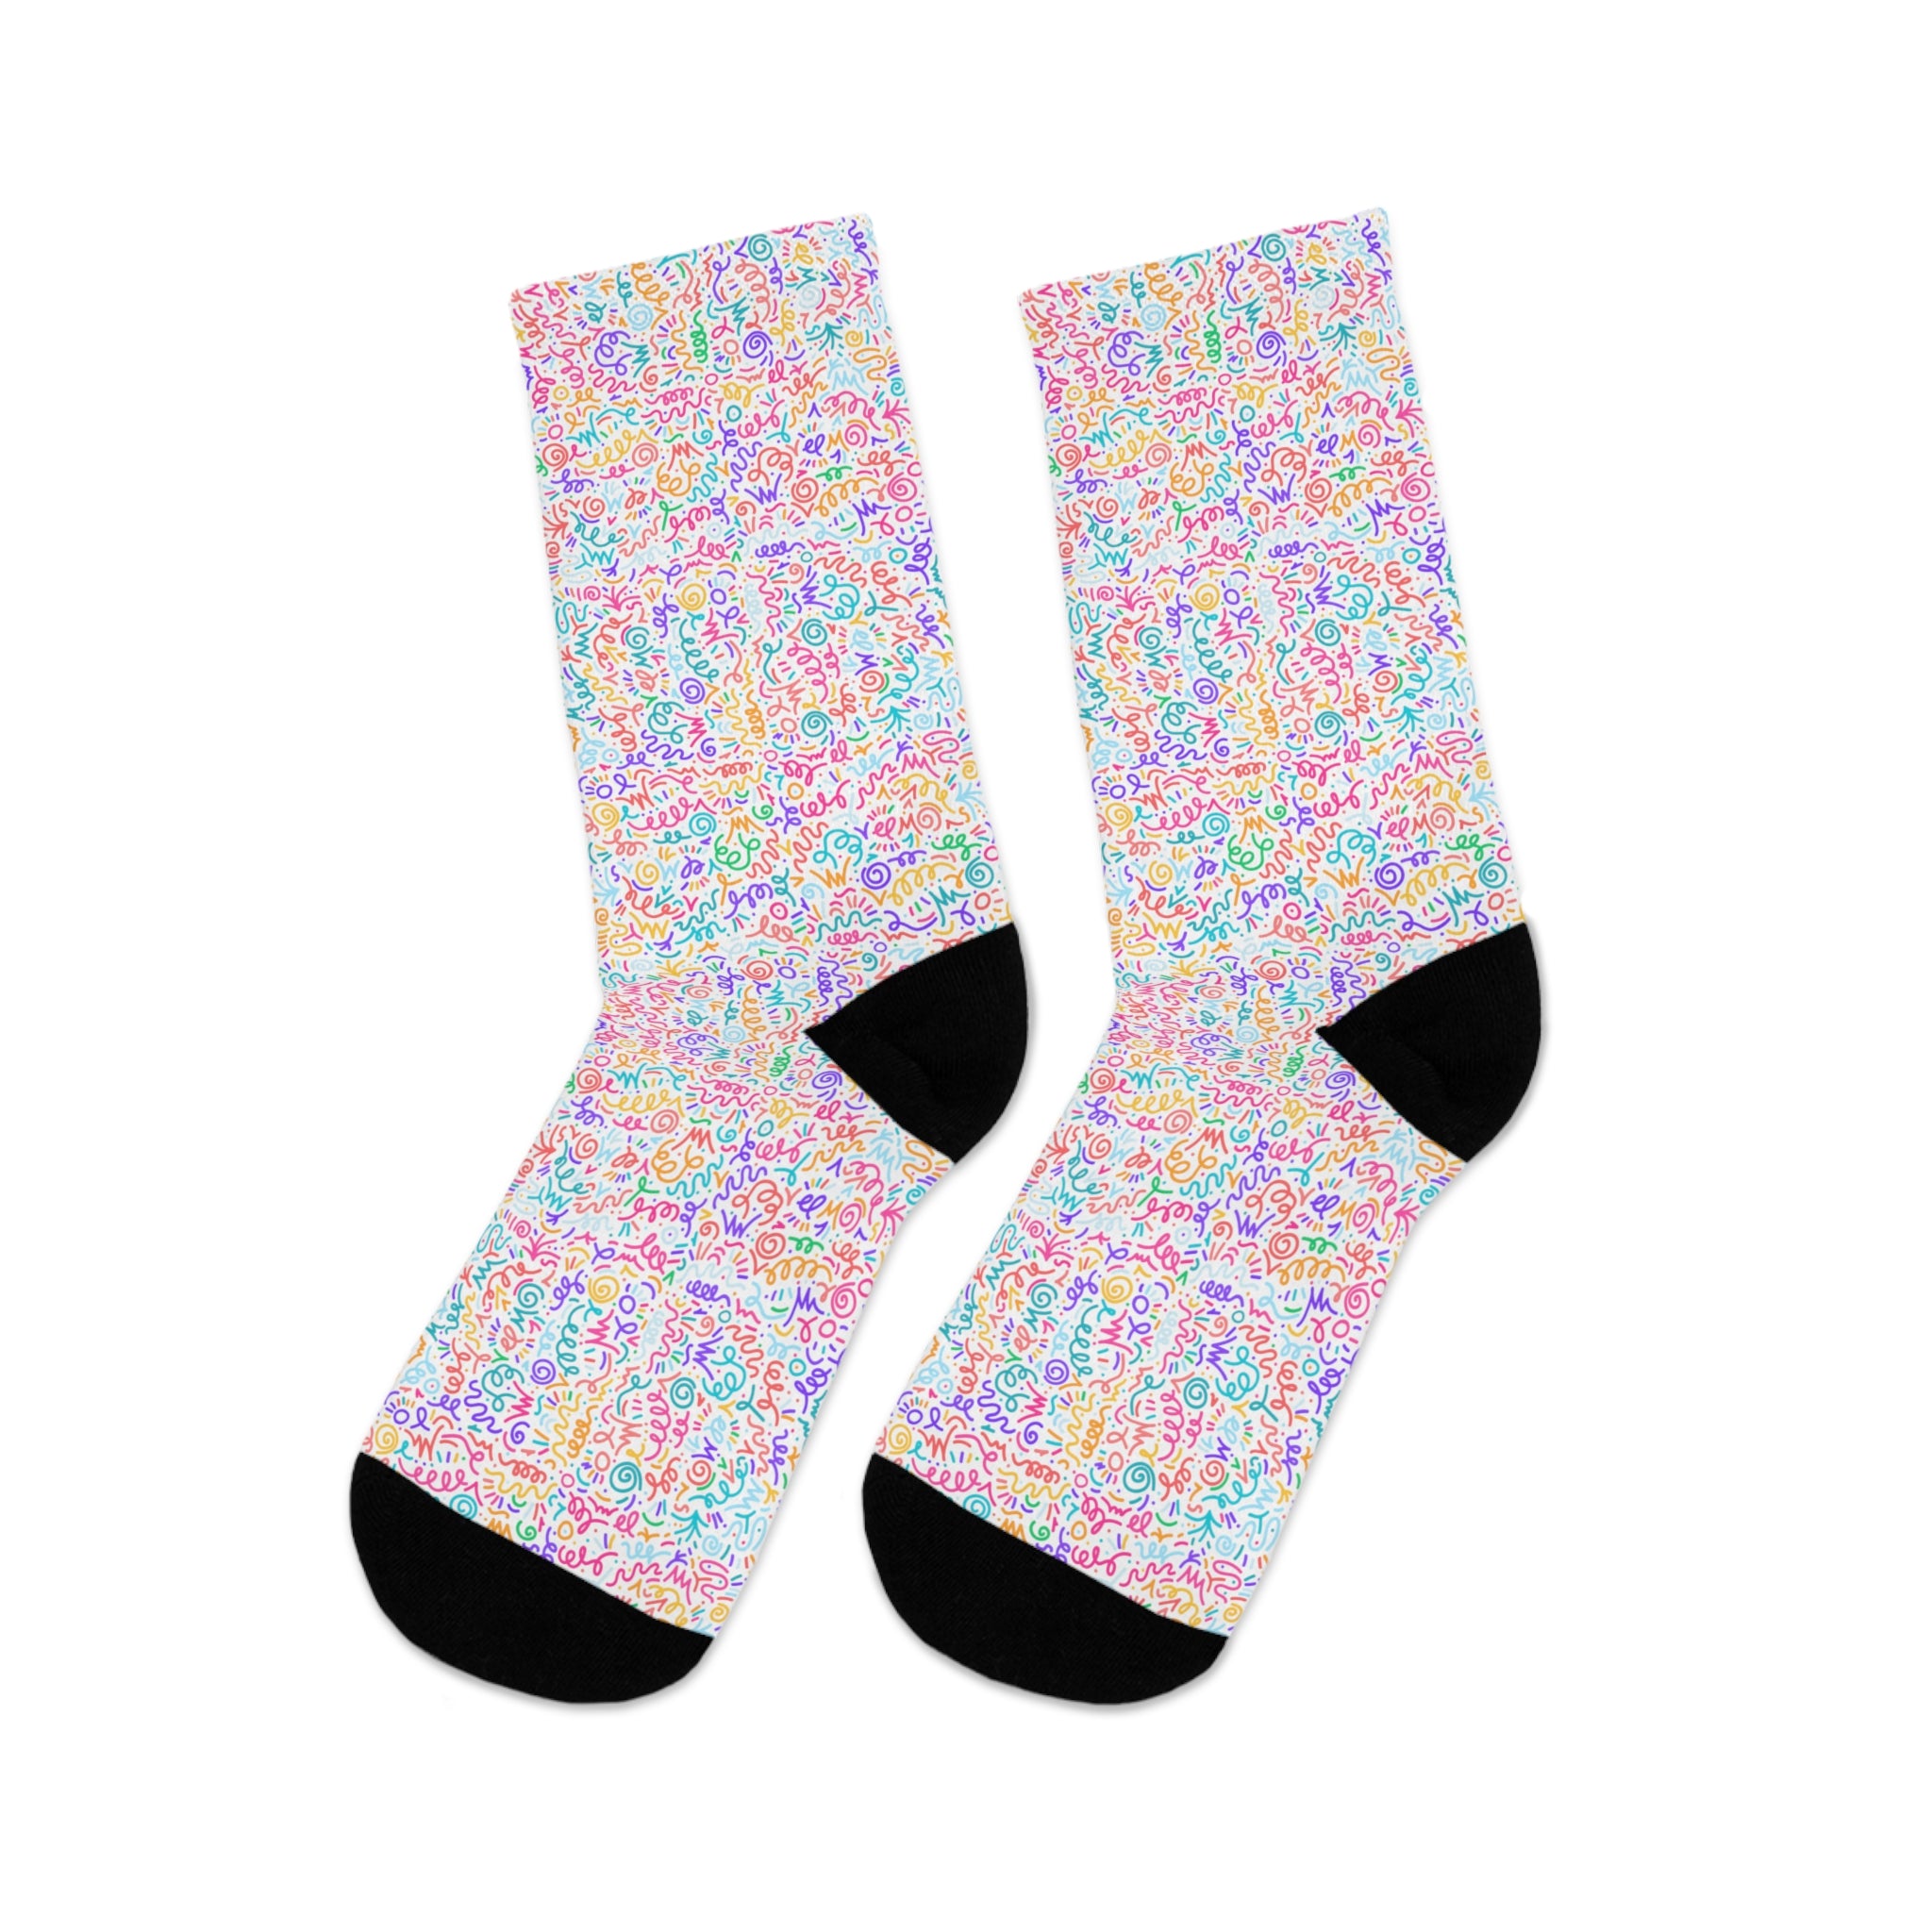 Squiggly Socks